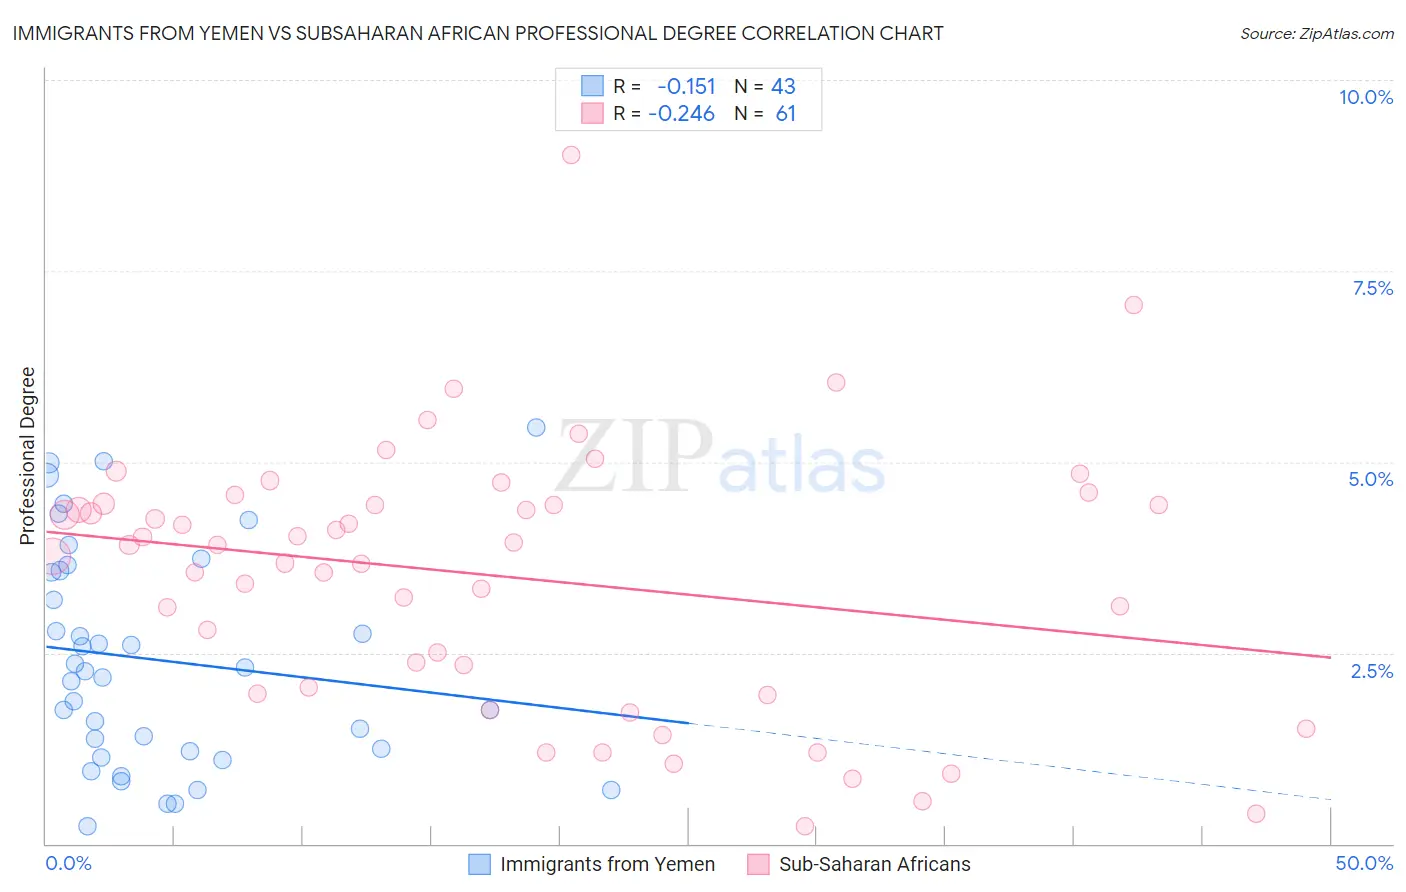 Immigrants from Yemen vs Subsaharan African Professional Degree